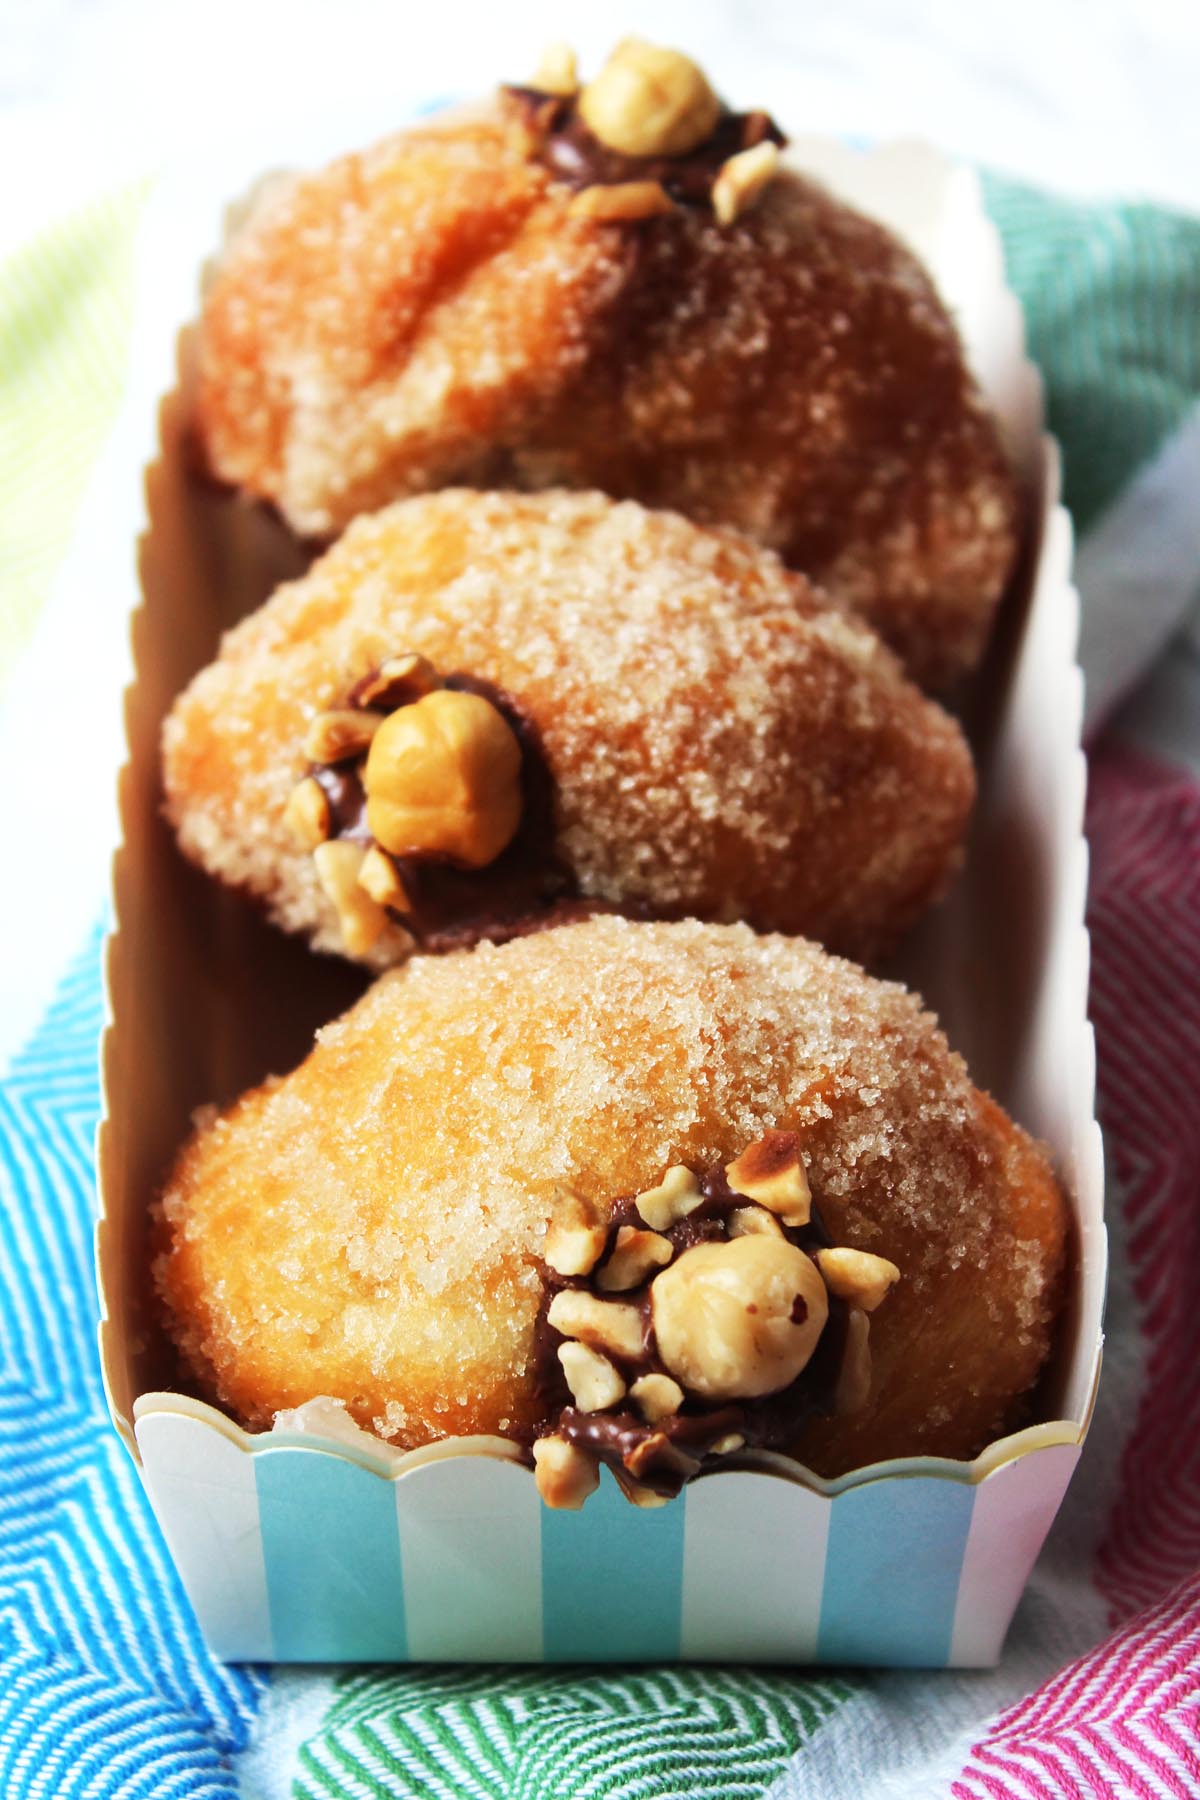 Everybody will love these Nutella Doughnuts. Stuffed which your favourite chocolate and hazelnut spread these deep fried doughnuts are a real treat! Get the recipe at Supper in the Suburbs!